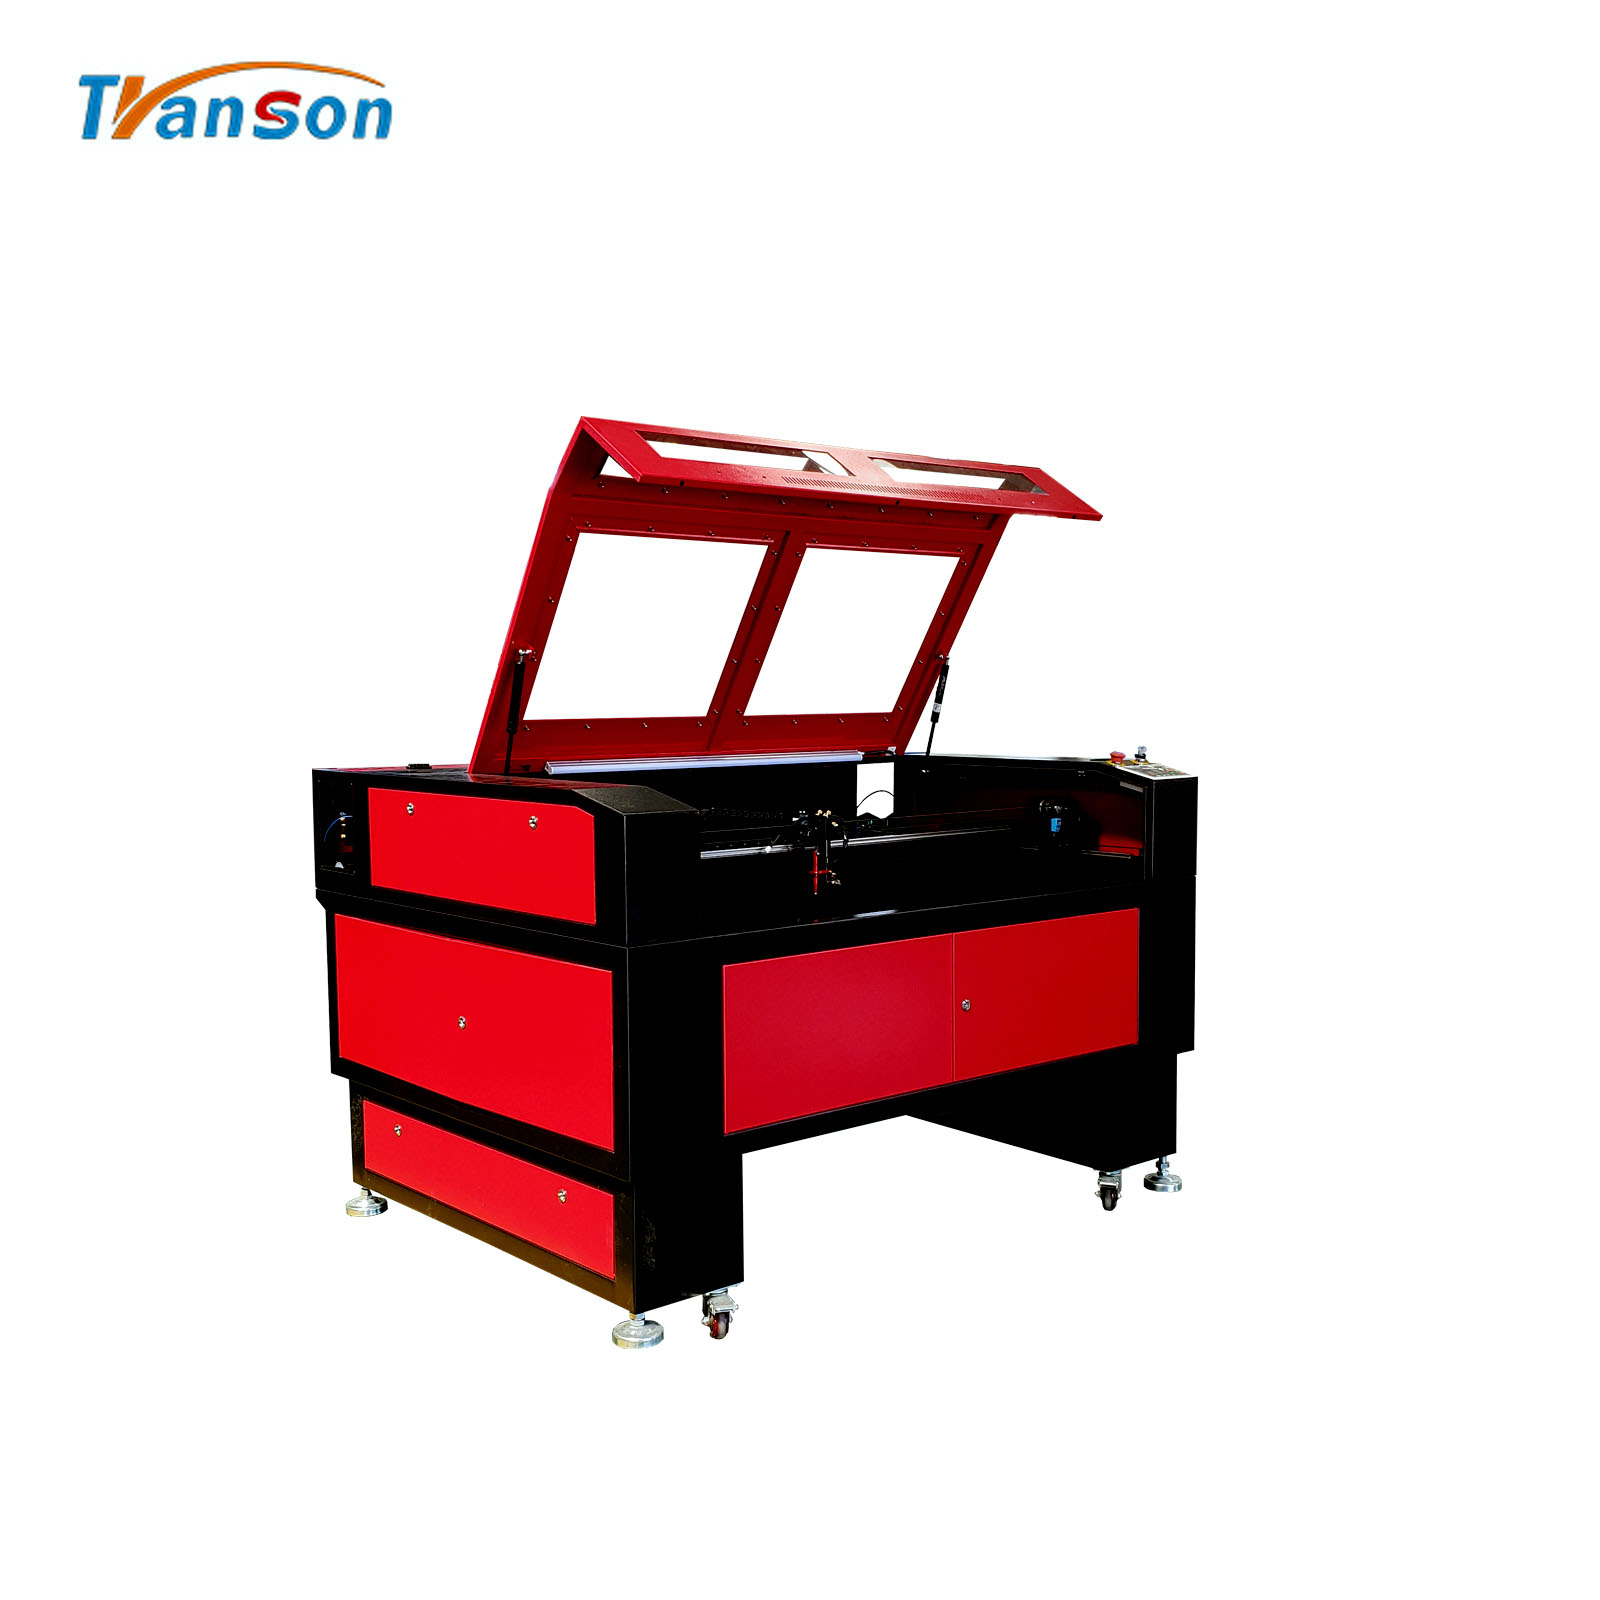 Widely used TS1290 CO2 laser cutting and engraving machine for wood paper acrylic leather